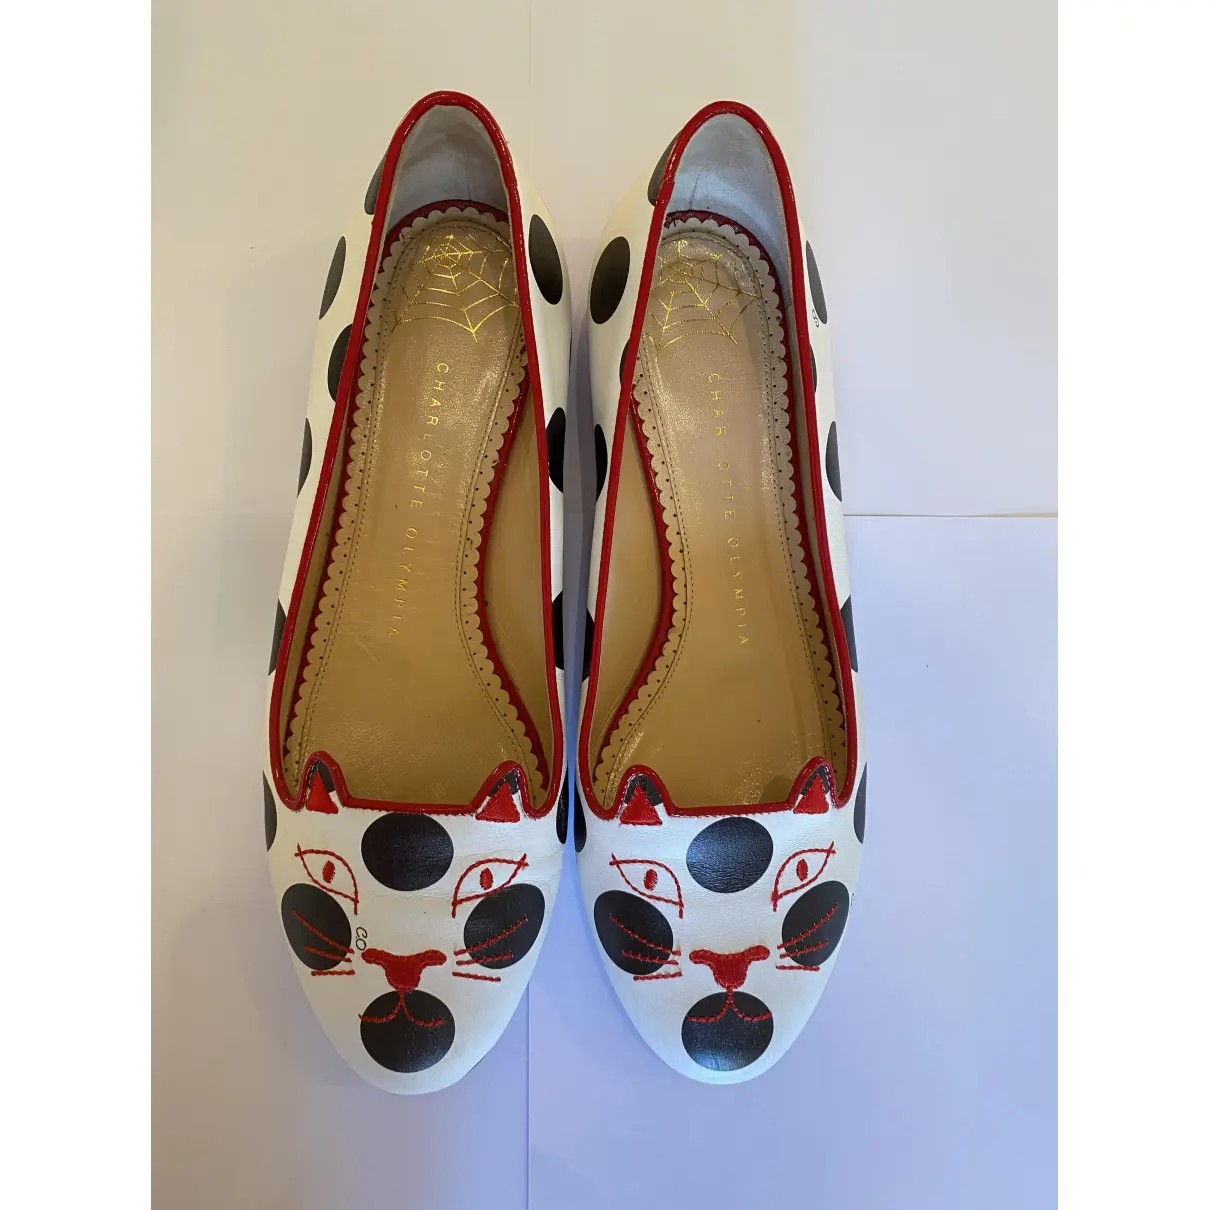 Buy Charlotte Olympia Kitty leather ballet flats online